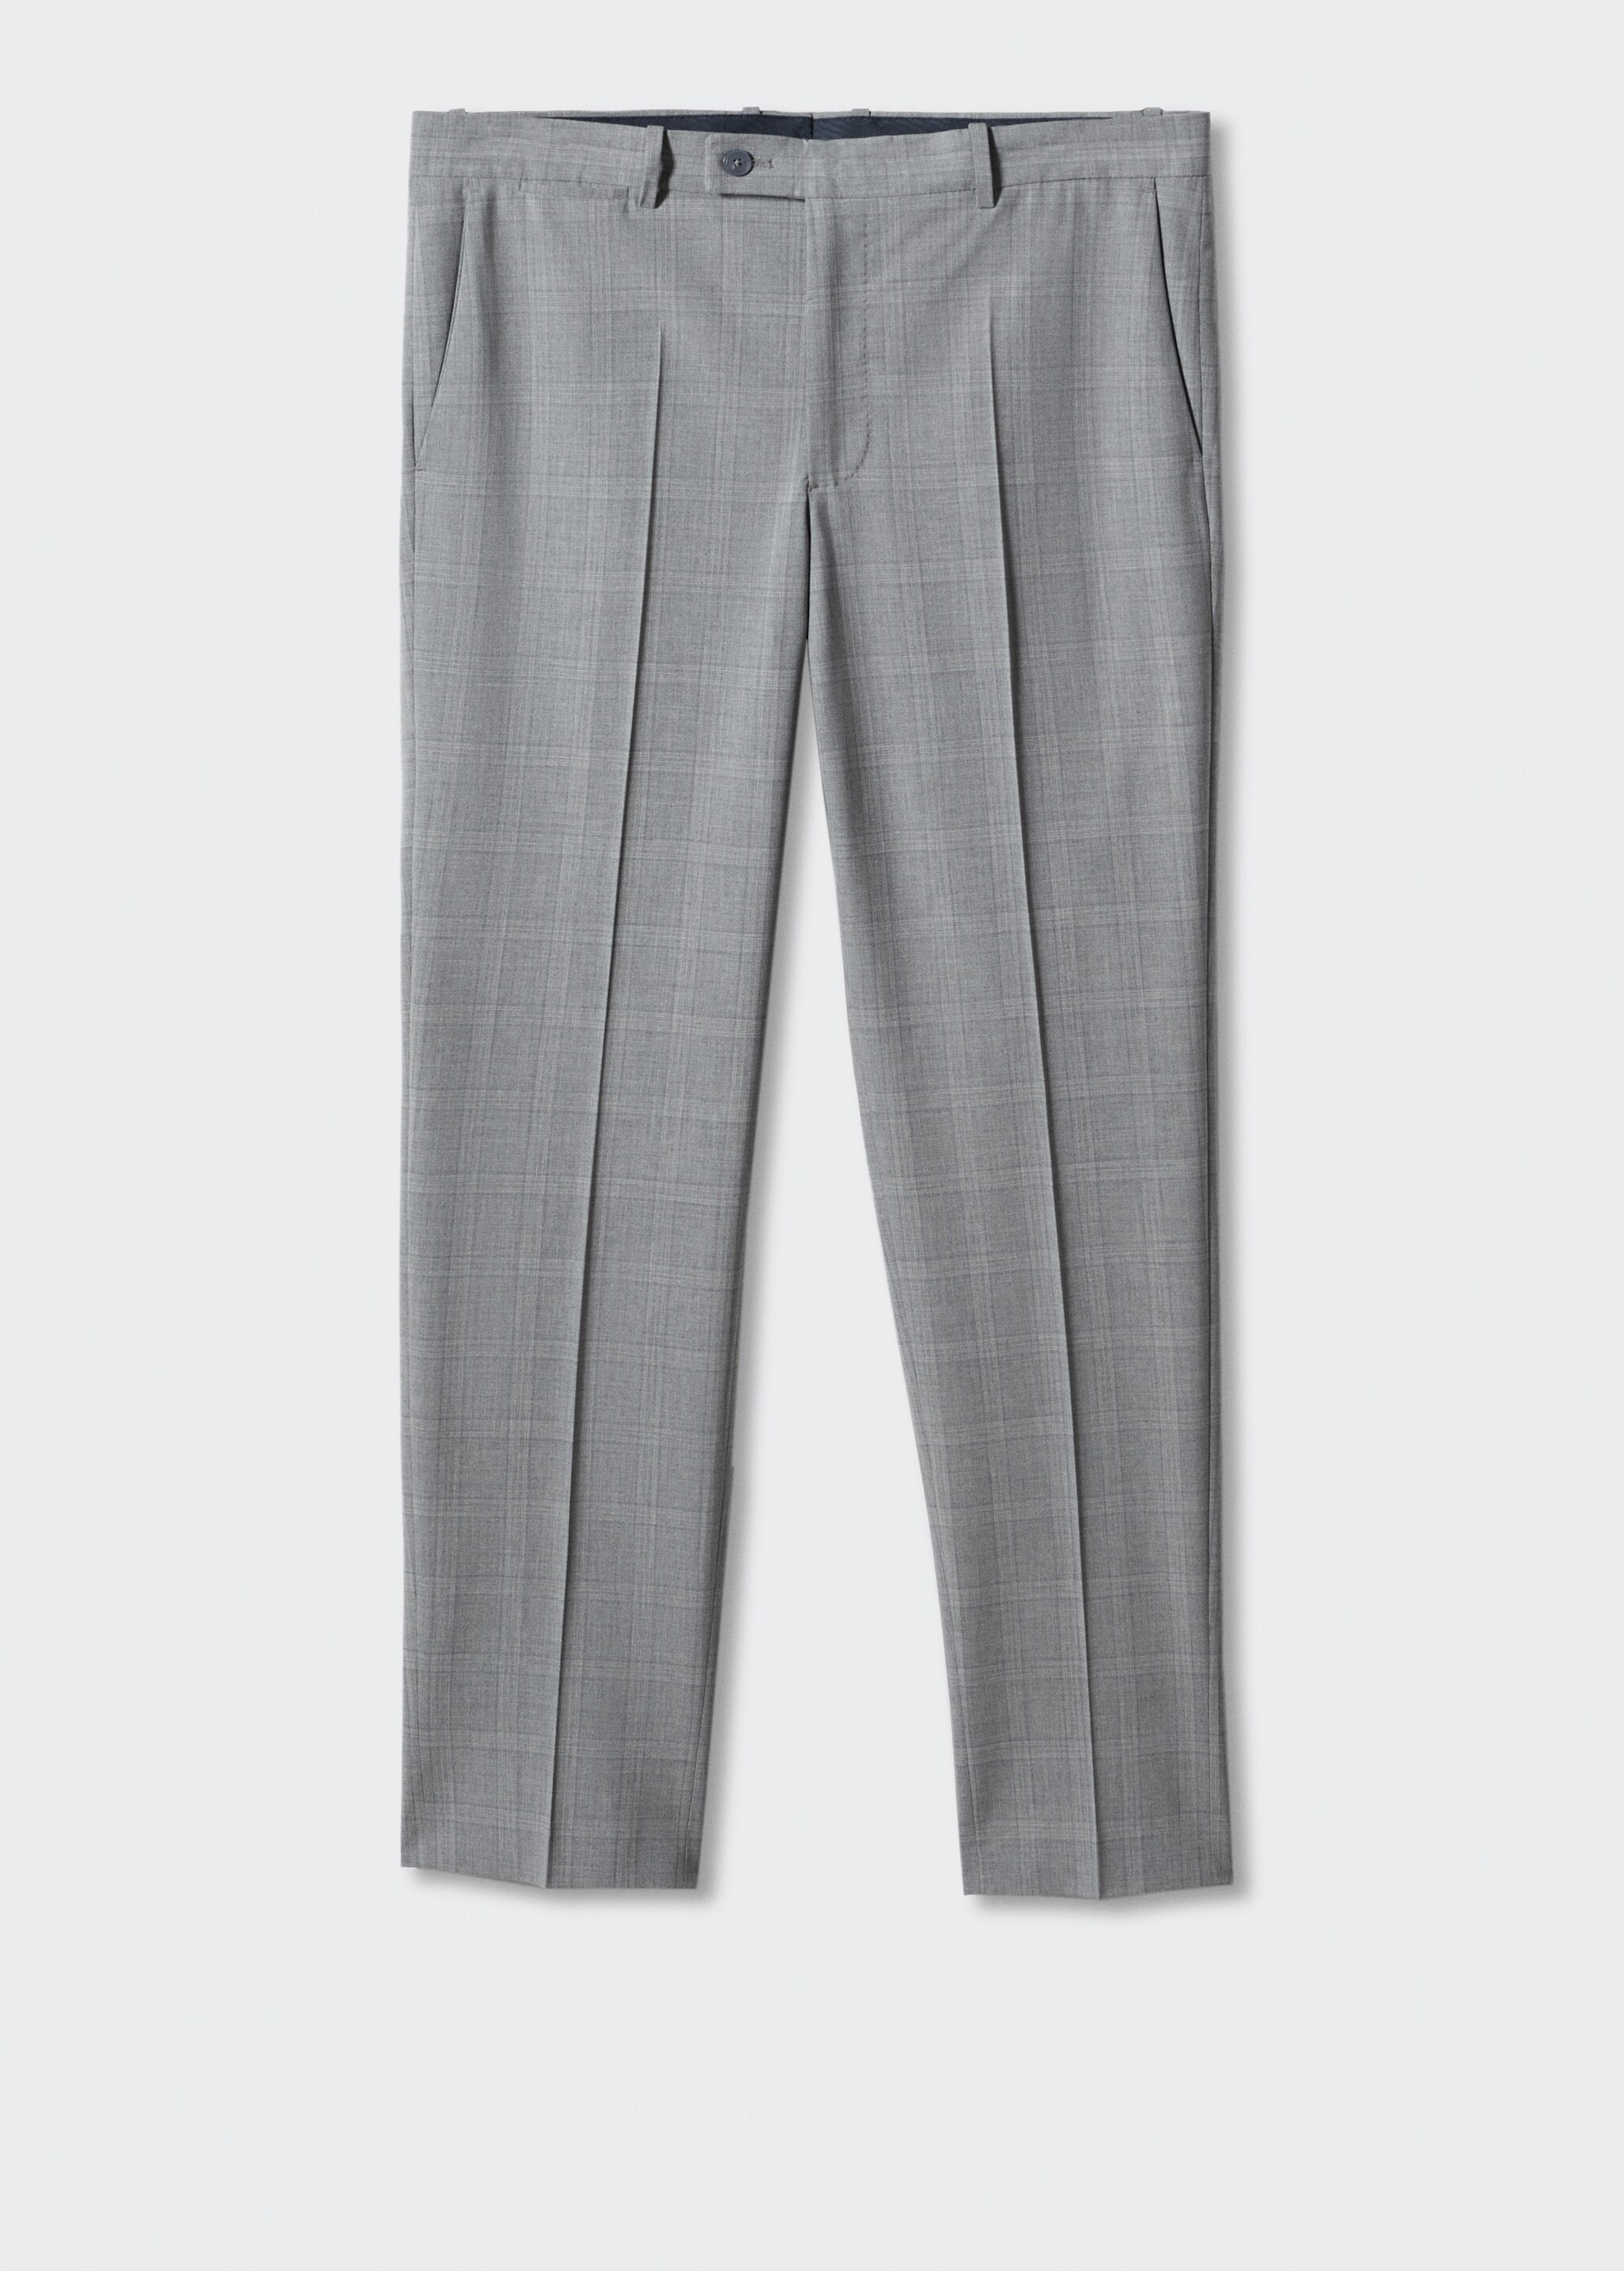 Slim fit wool suit trousers - Article without model